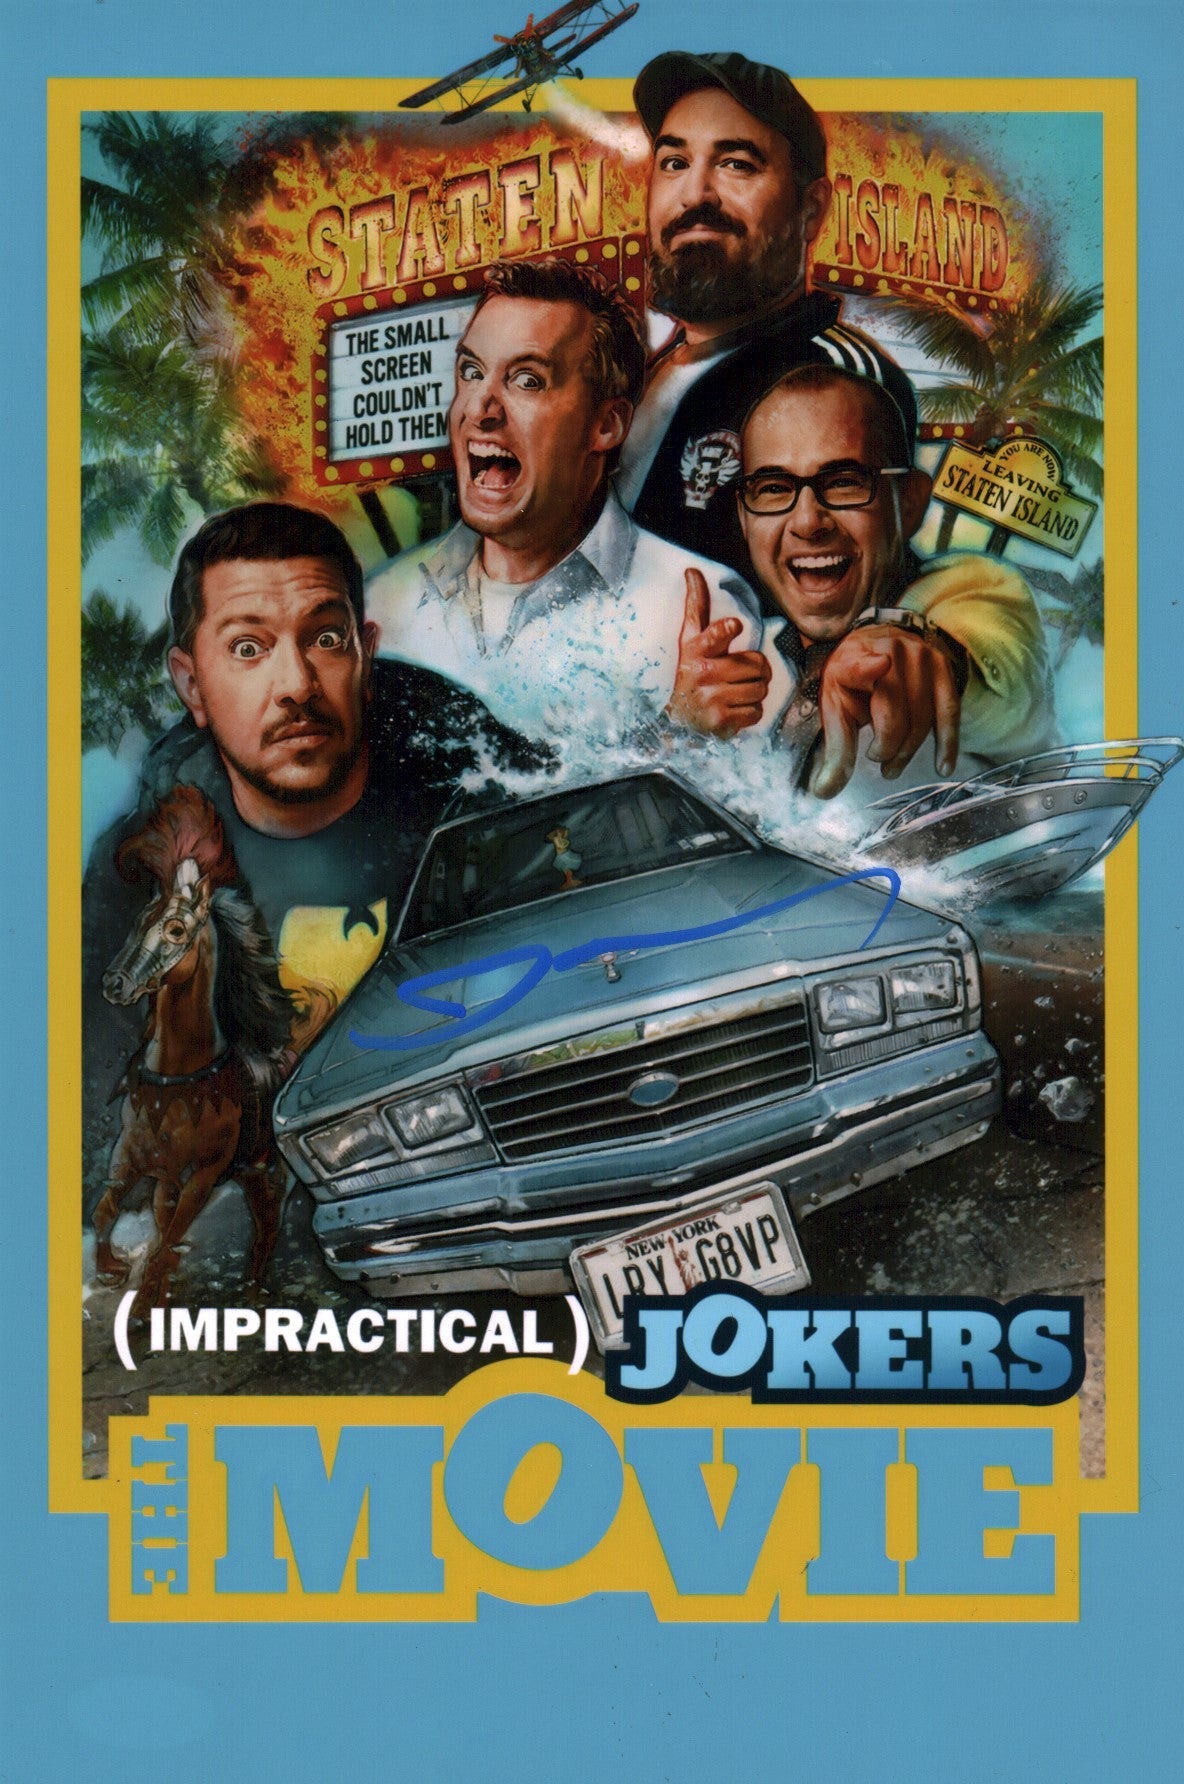 James Murray Impractical Jokers The Movie 11x17 Photo Poster Signed JSA Certified Autograph